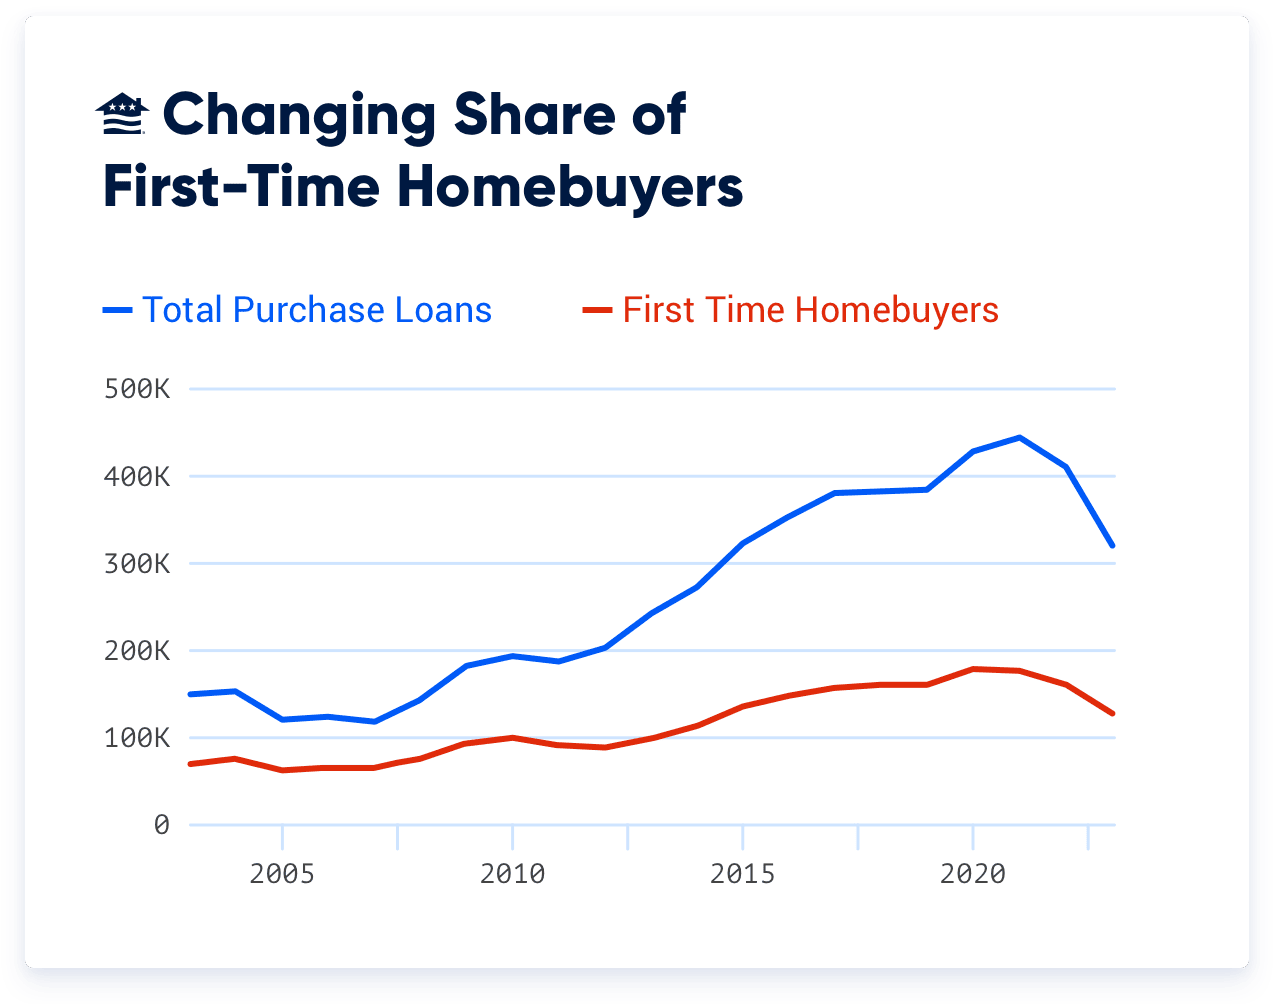 Last year alone, Millennial and Generation Z buyers accounted for nearly 60% of VA purchase loans.